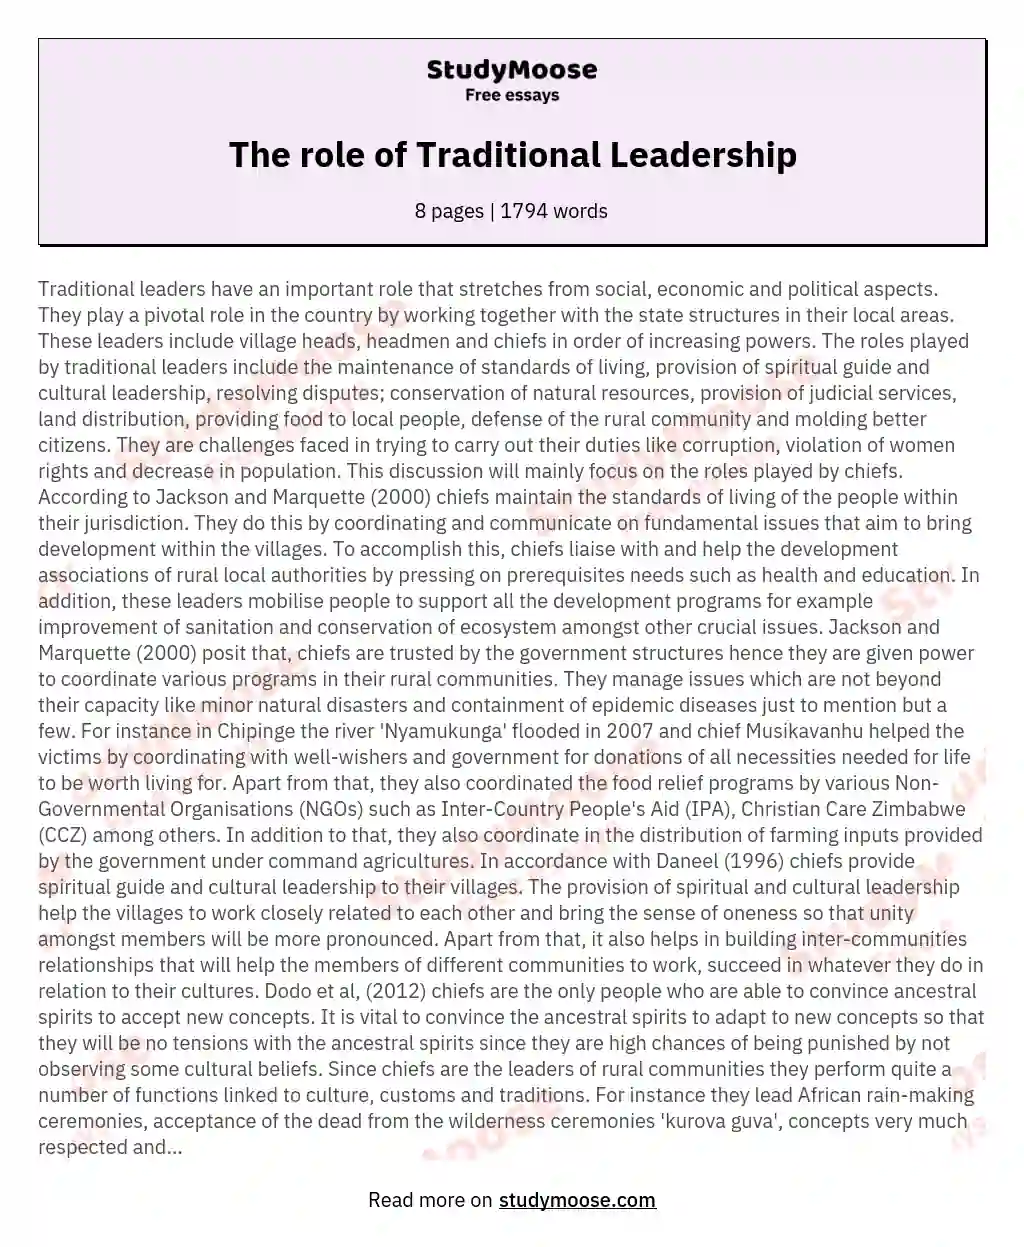 The role of Traditional Leadership essay